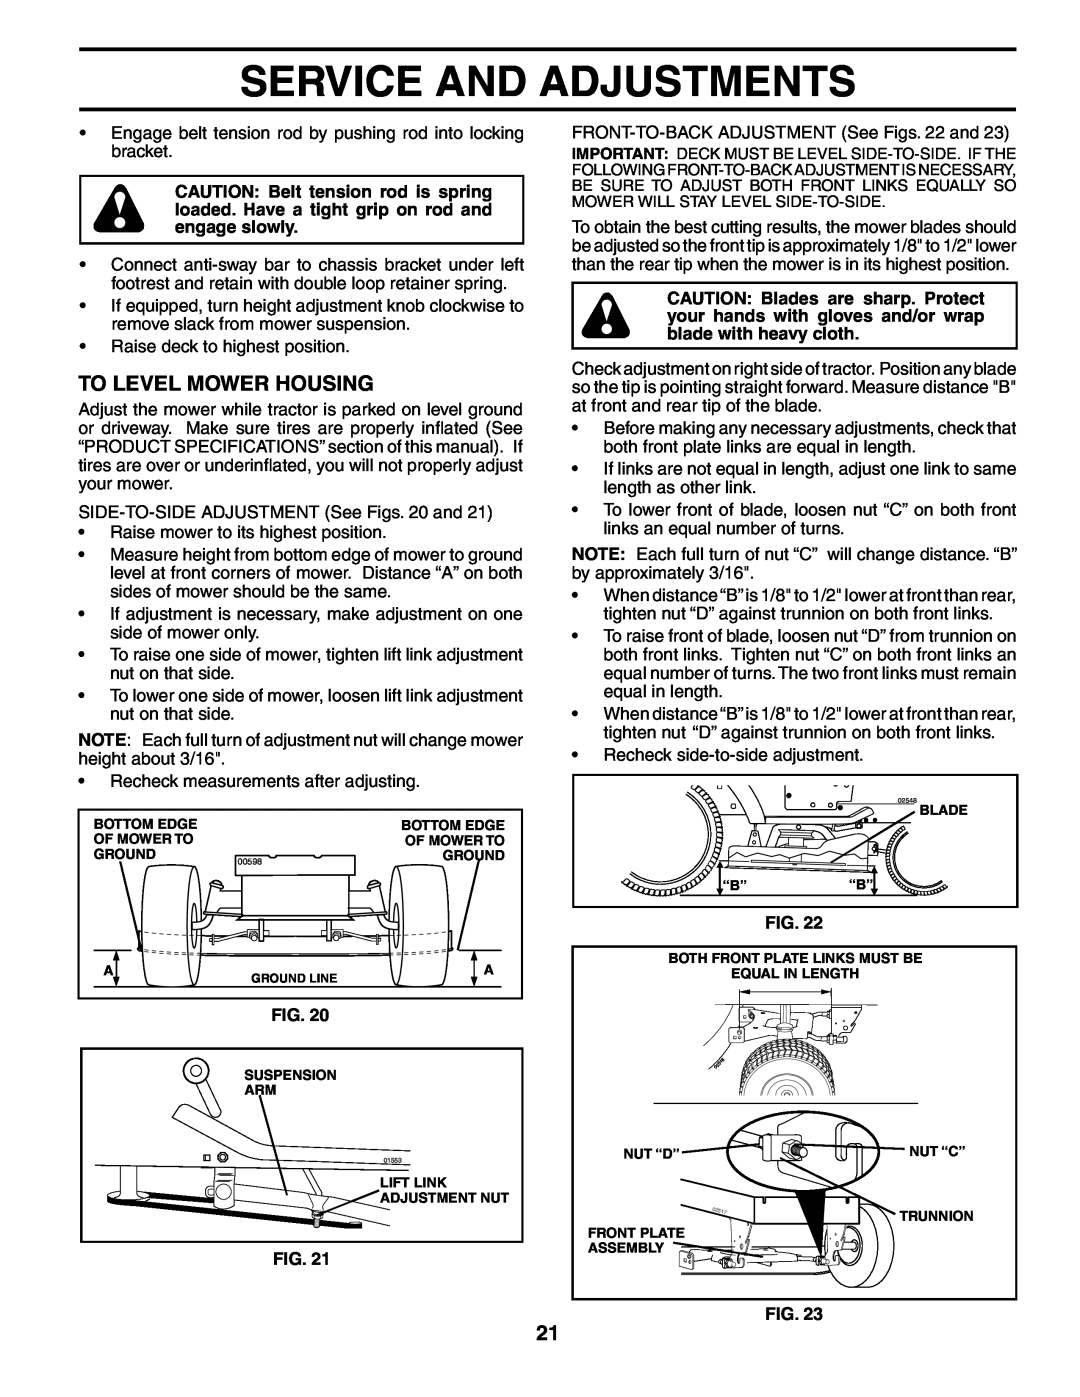 Poulan PDGT26H48C owner manual To Level Mower Housing, Service And Adjustments, Ground Line 